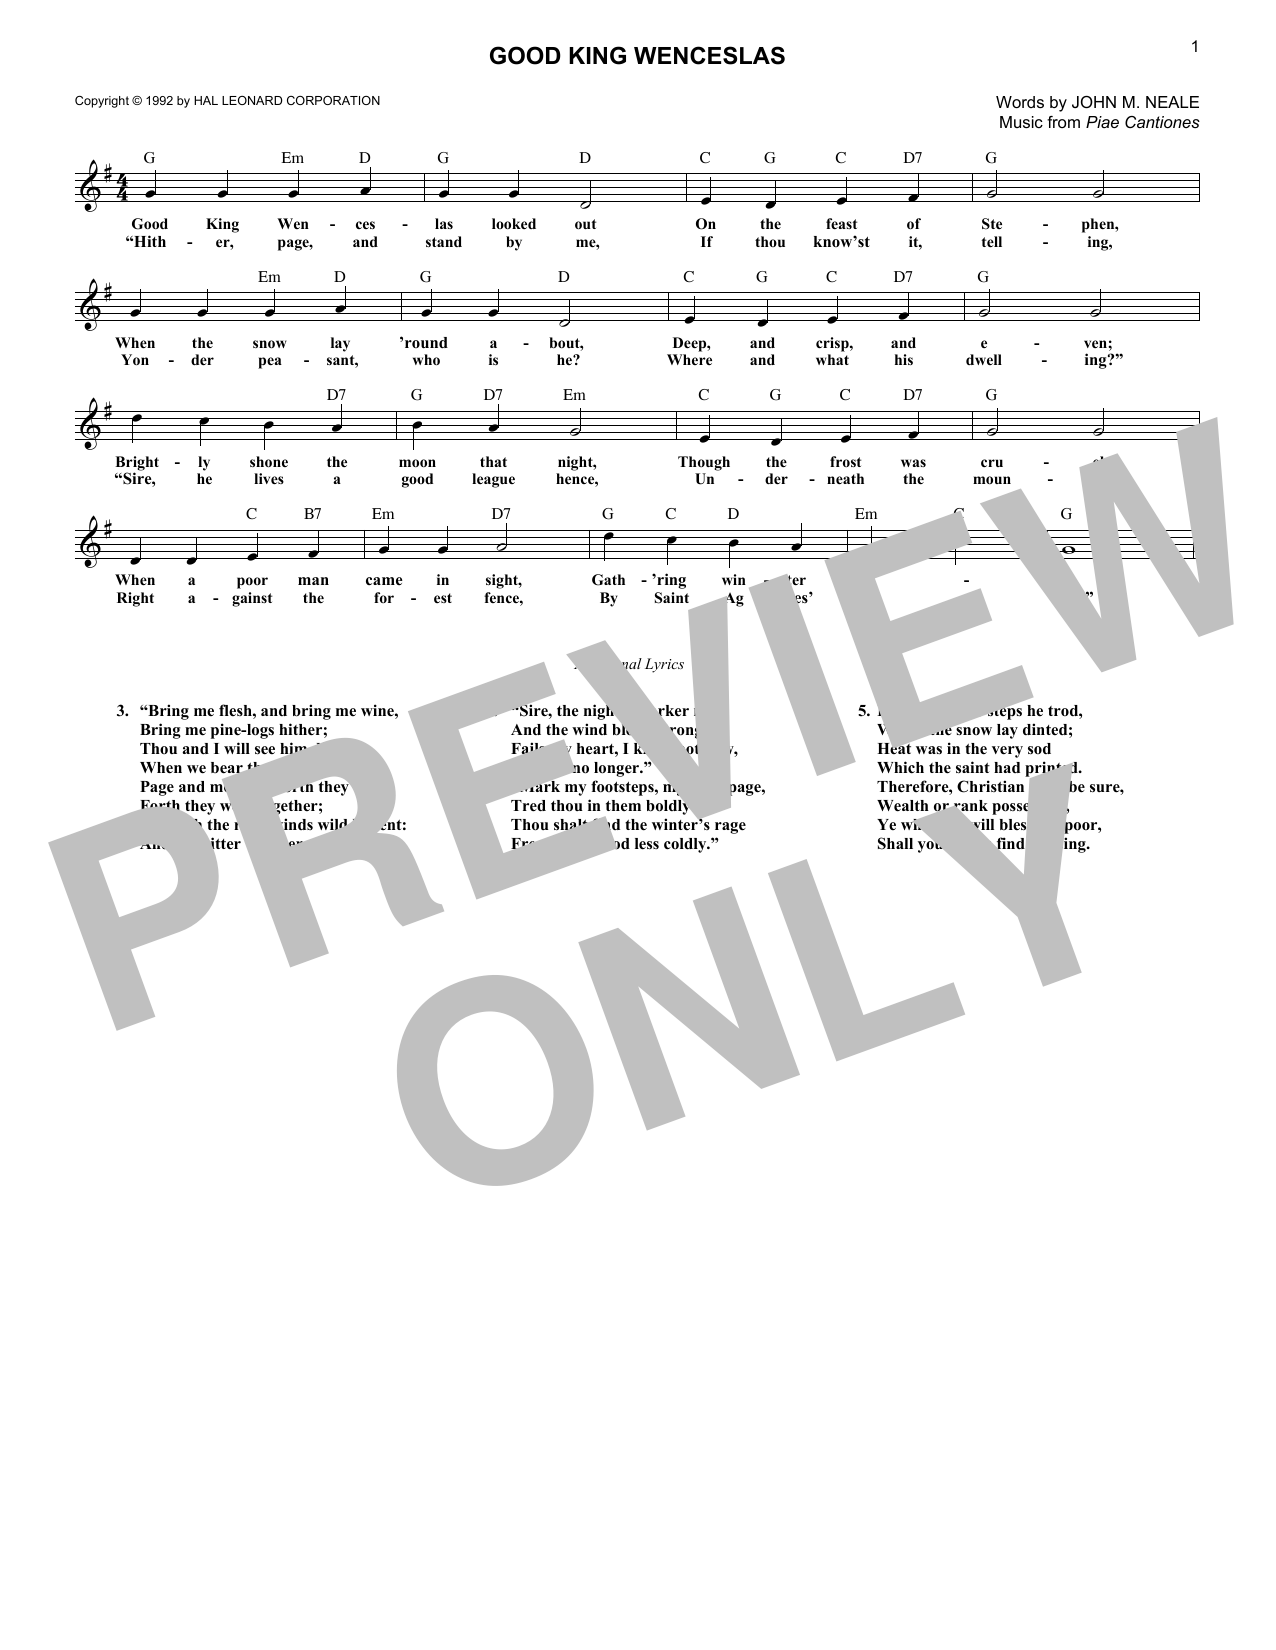 Download Piae Cantiones Good King Wenceslas Sheet Music